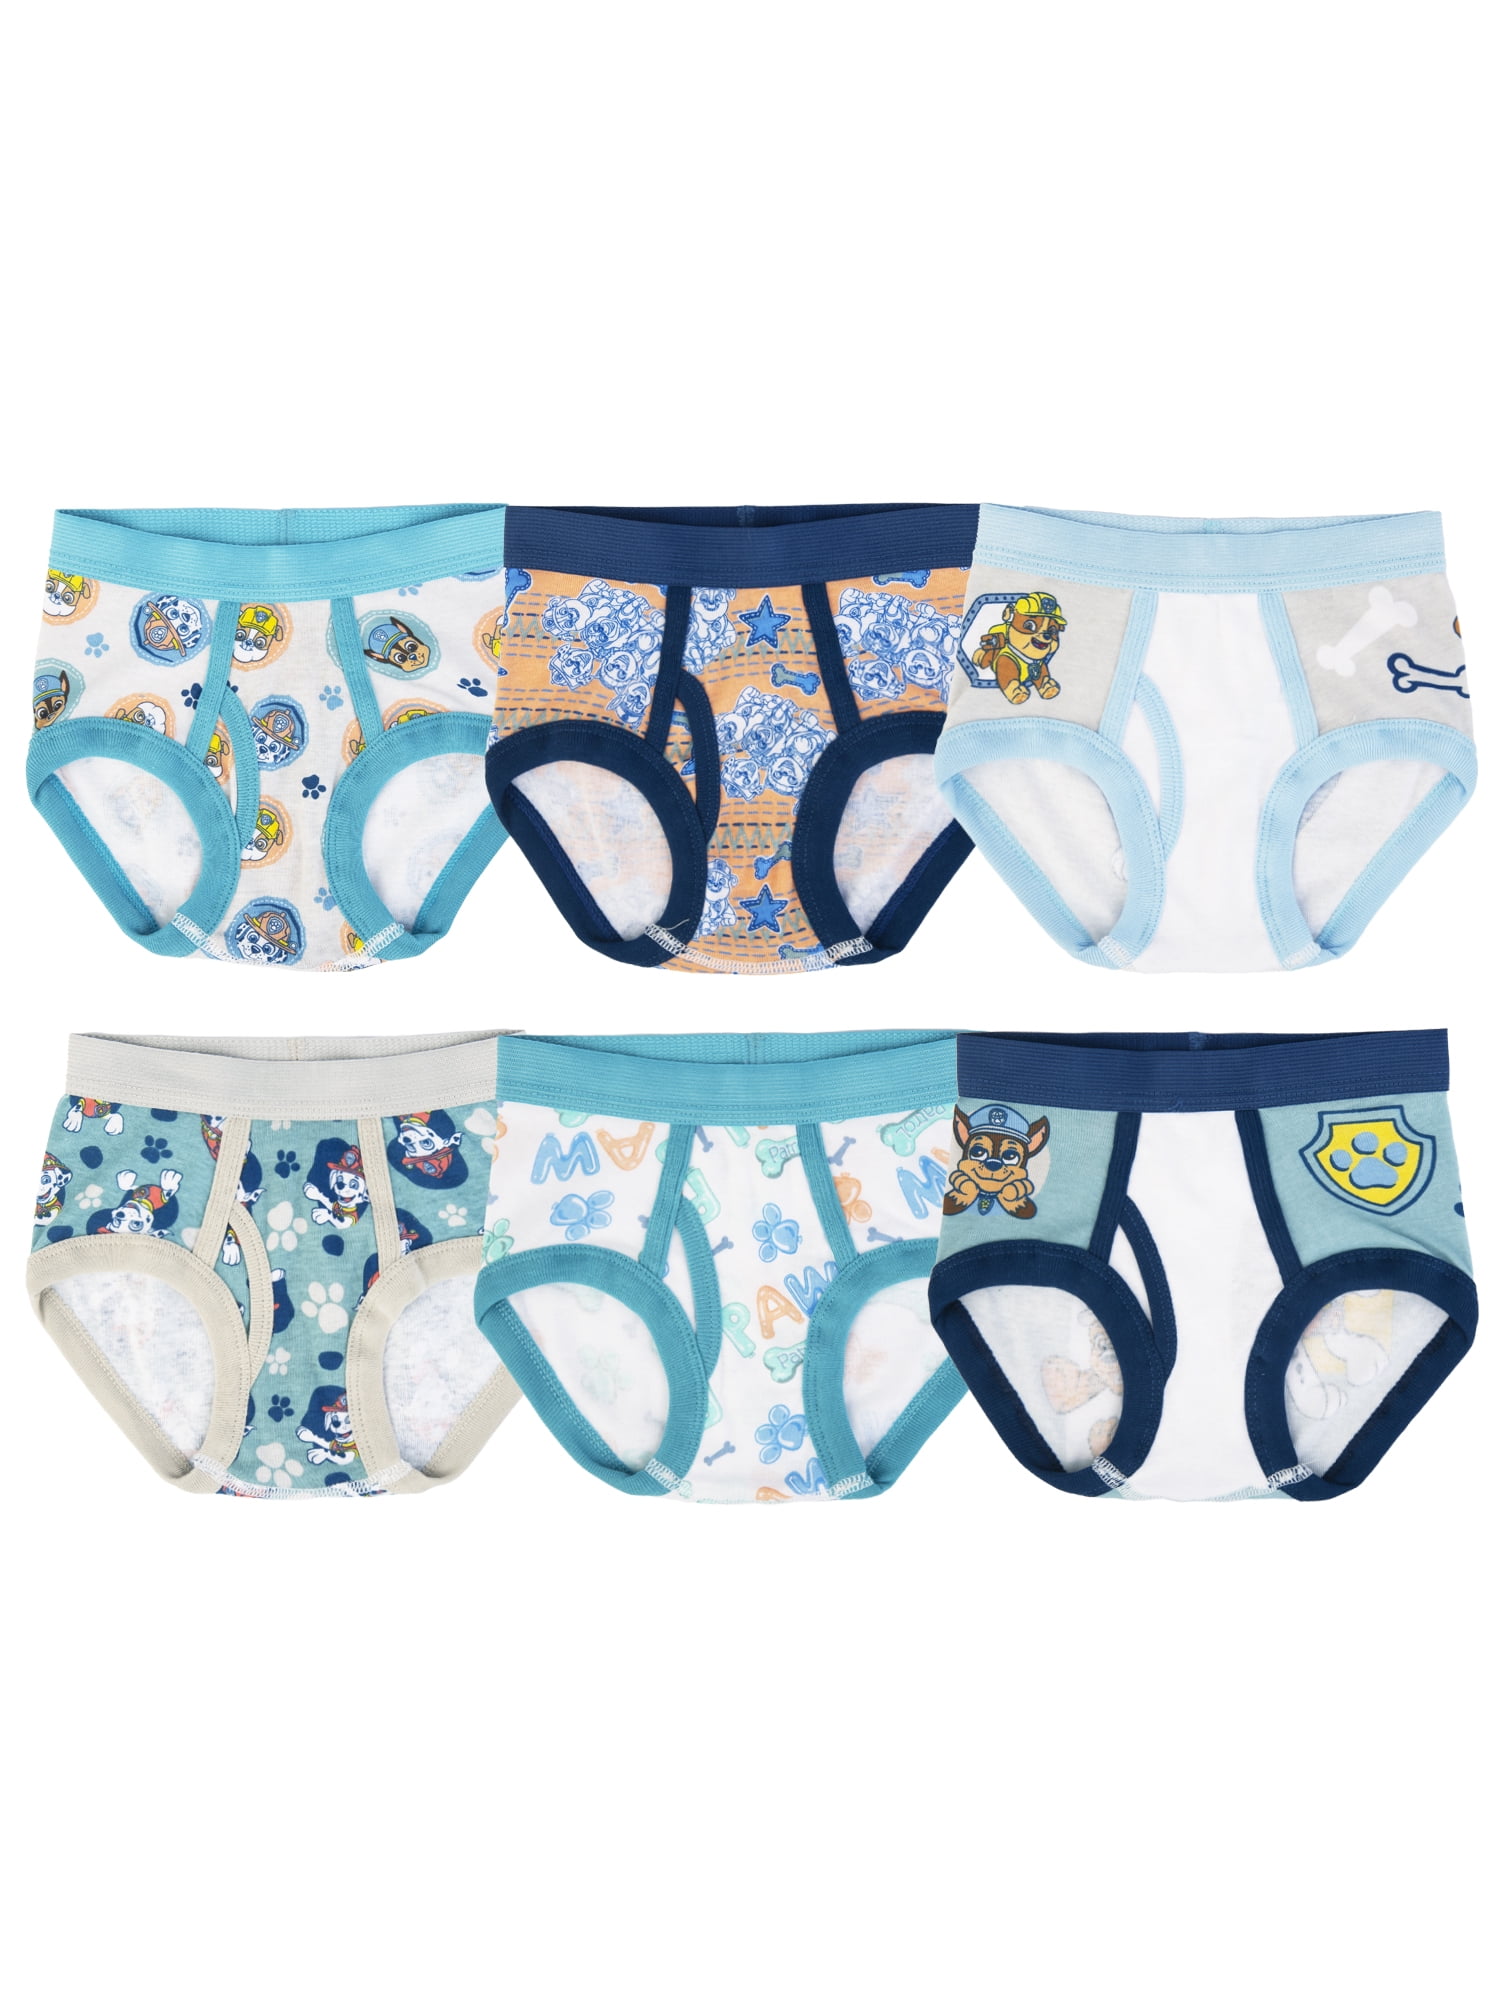 Paw Patrol Toddler Boys Briefs, 6 Pack Sizes 2T-4T